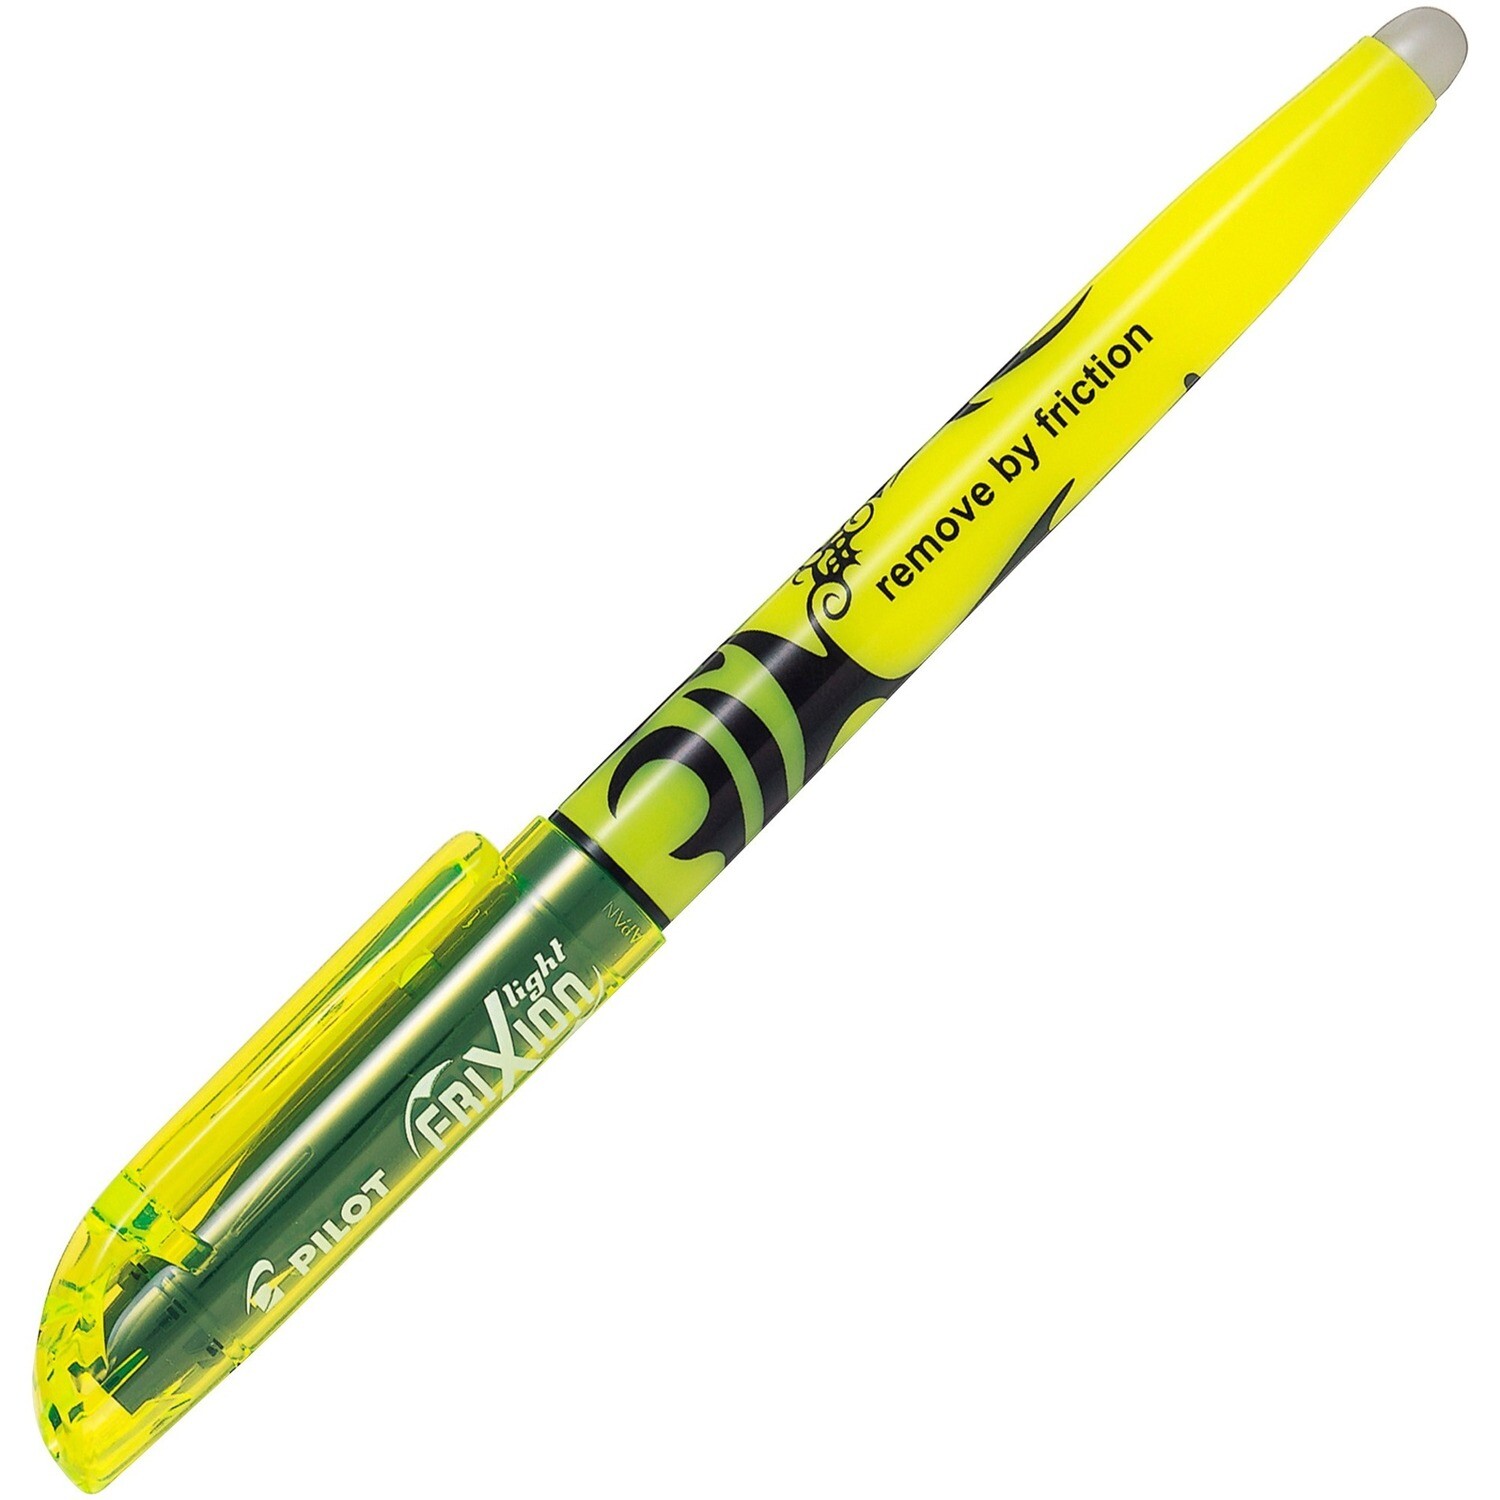 Highlighter, Erasable, Frixion, Chisel Yellow, Single